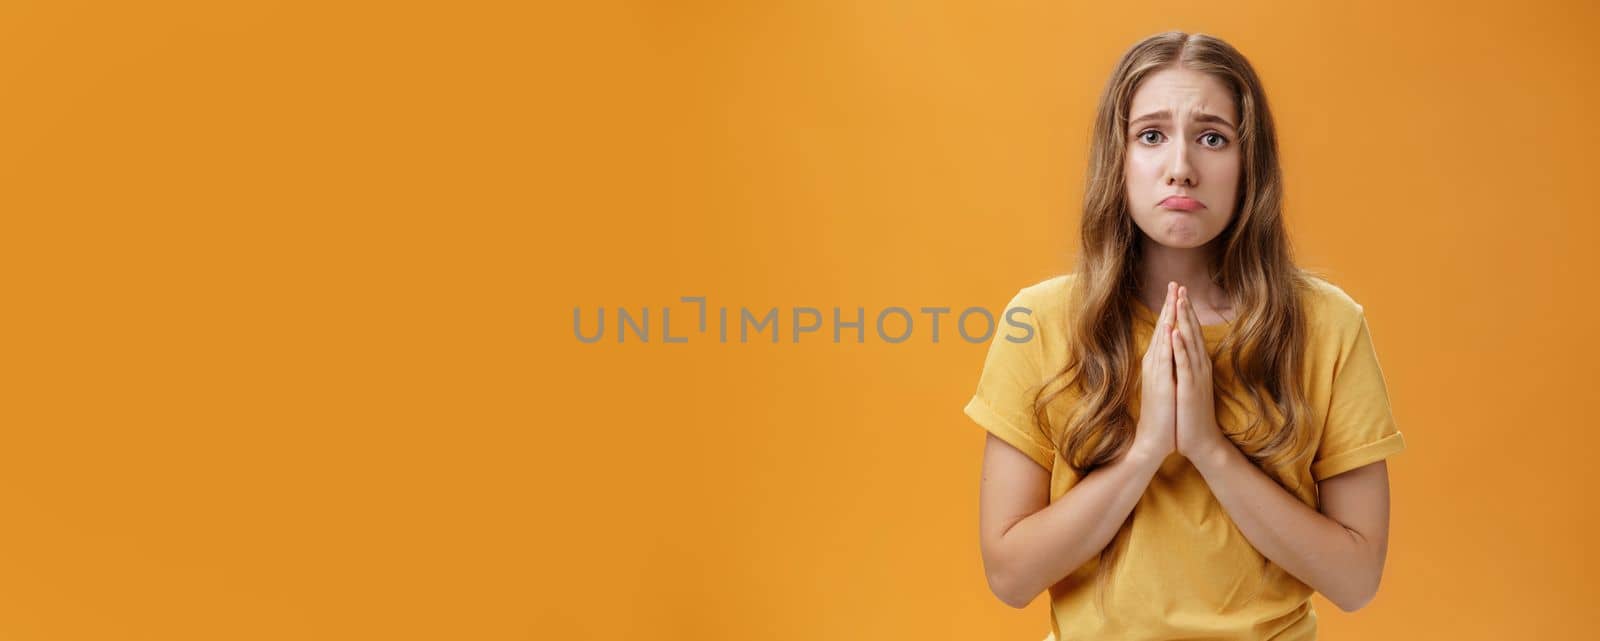 Silly girl needs help begging with hopeful puppy eyes holding hands in pray pouting and frowning feeling miserable stuck in bad situation standing upset over orange background, borrowing money.